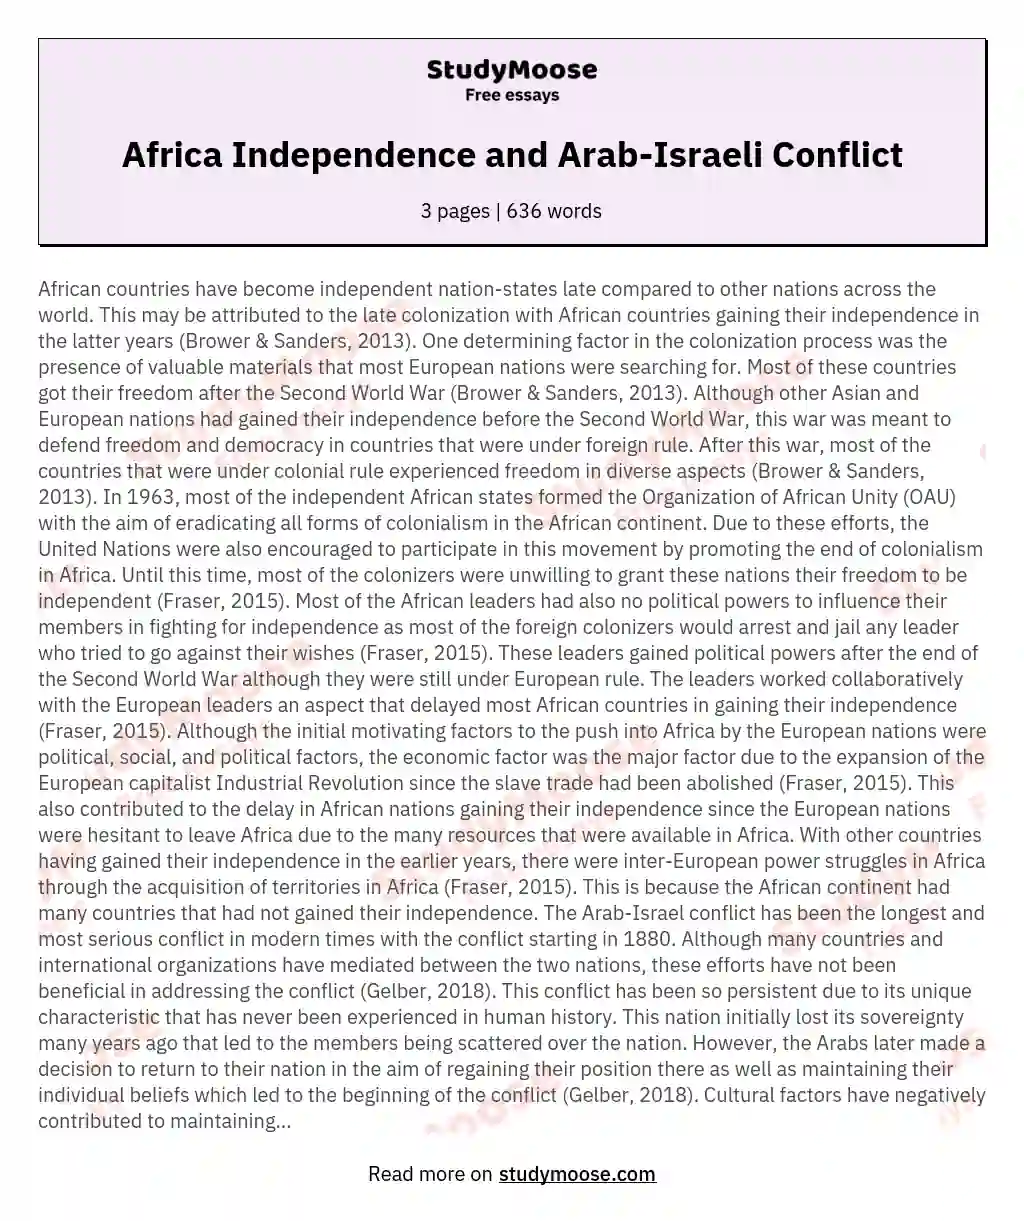 Africa Independence and Arab-Israeli Conflict essay